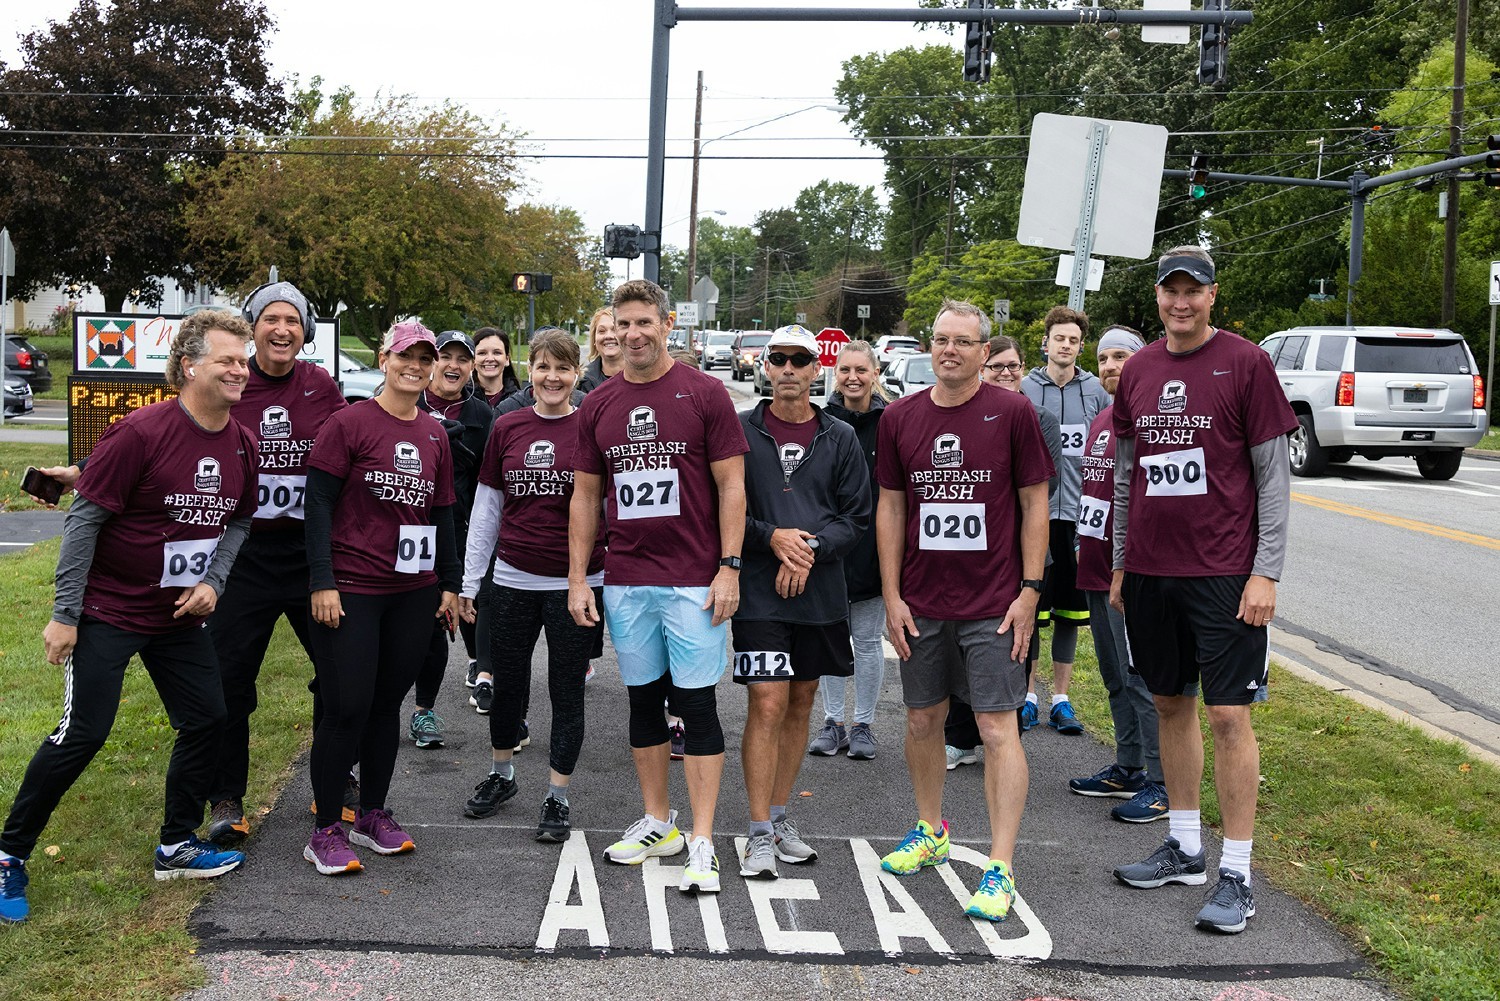 Staff participated in the Beef Bash Dash 5K, uniting their focus on team building and wellness